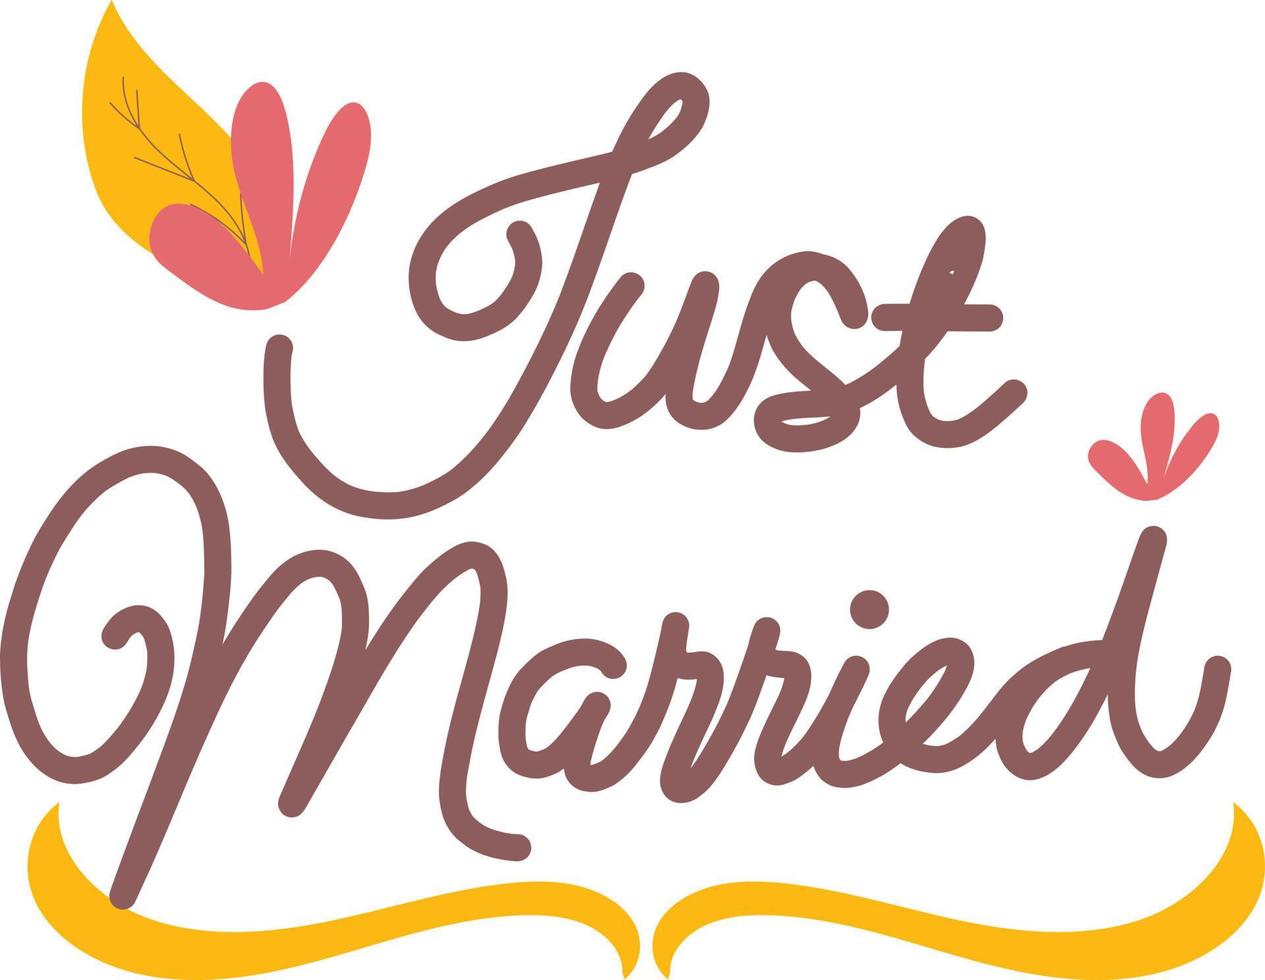 Just married typography illustration vector